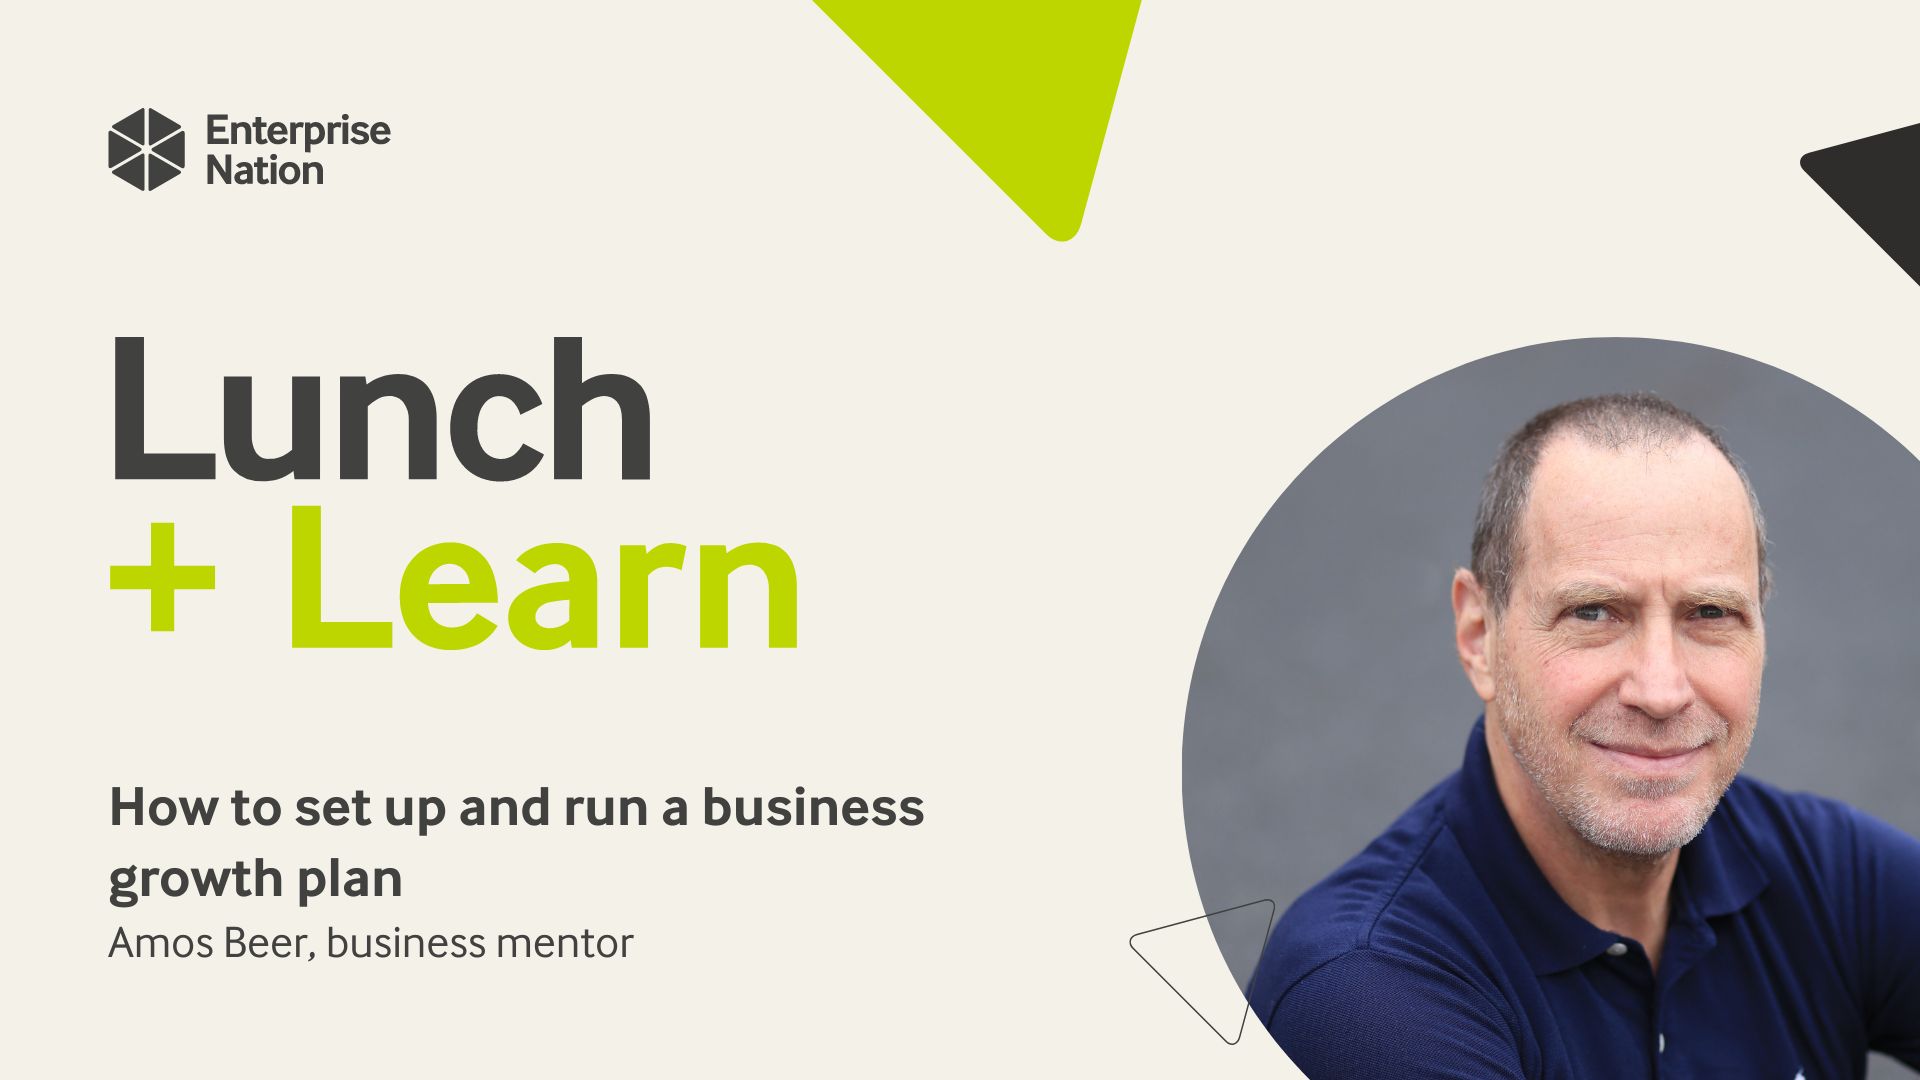 Lunch and Learn: How to set up and run a business growth plan